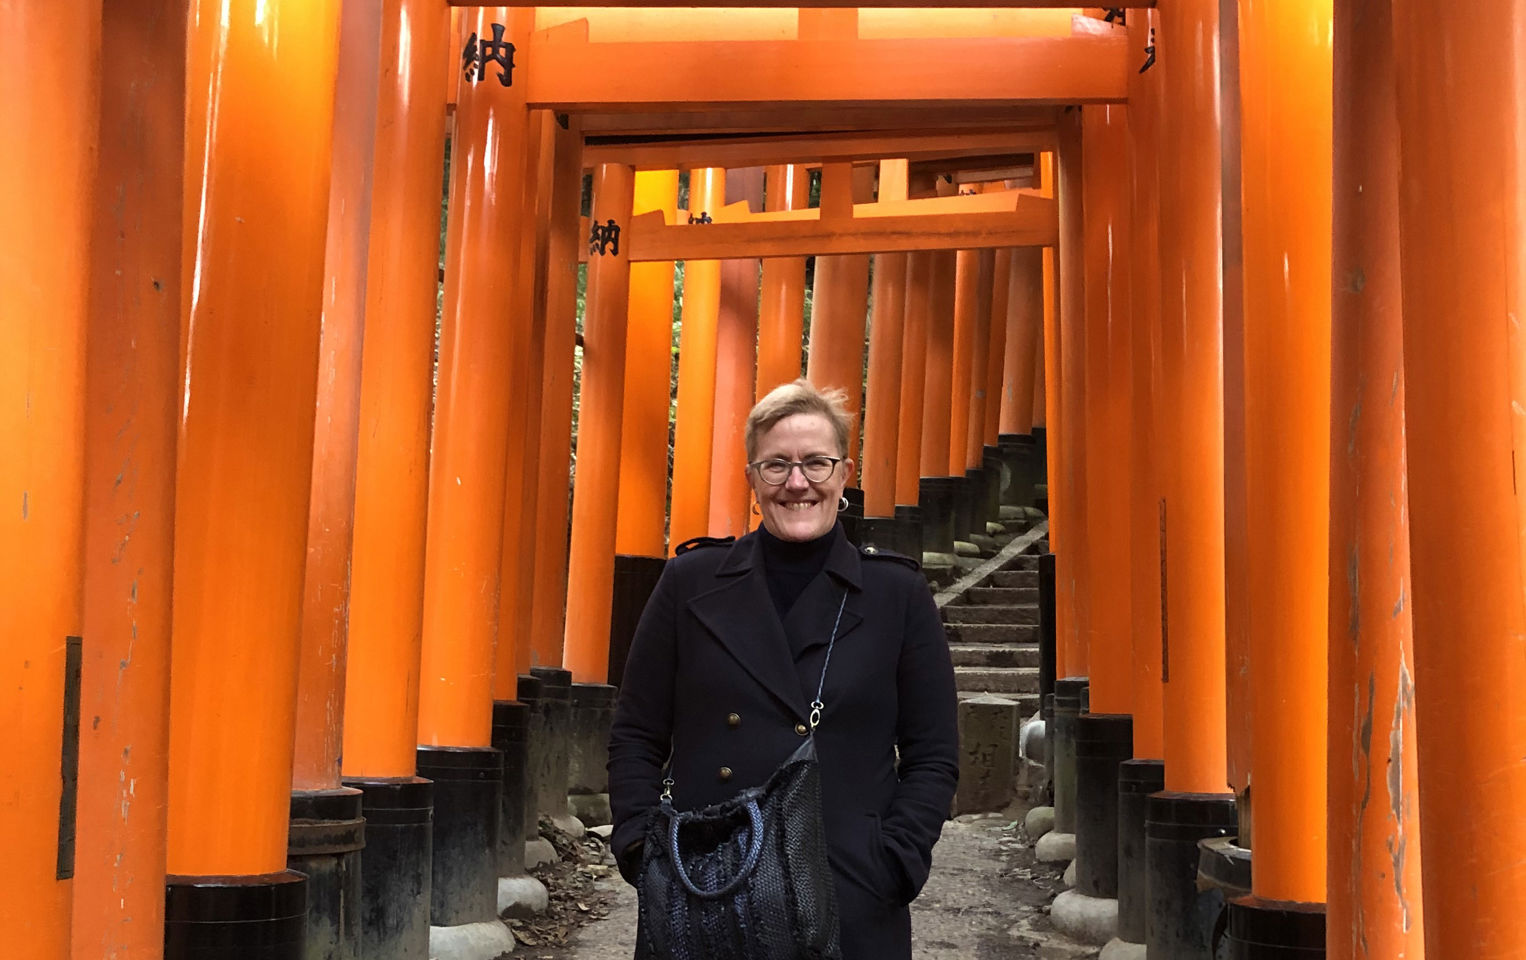 Alison standing under the orange arches in Japan in a black winter coat